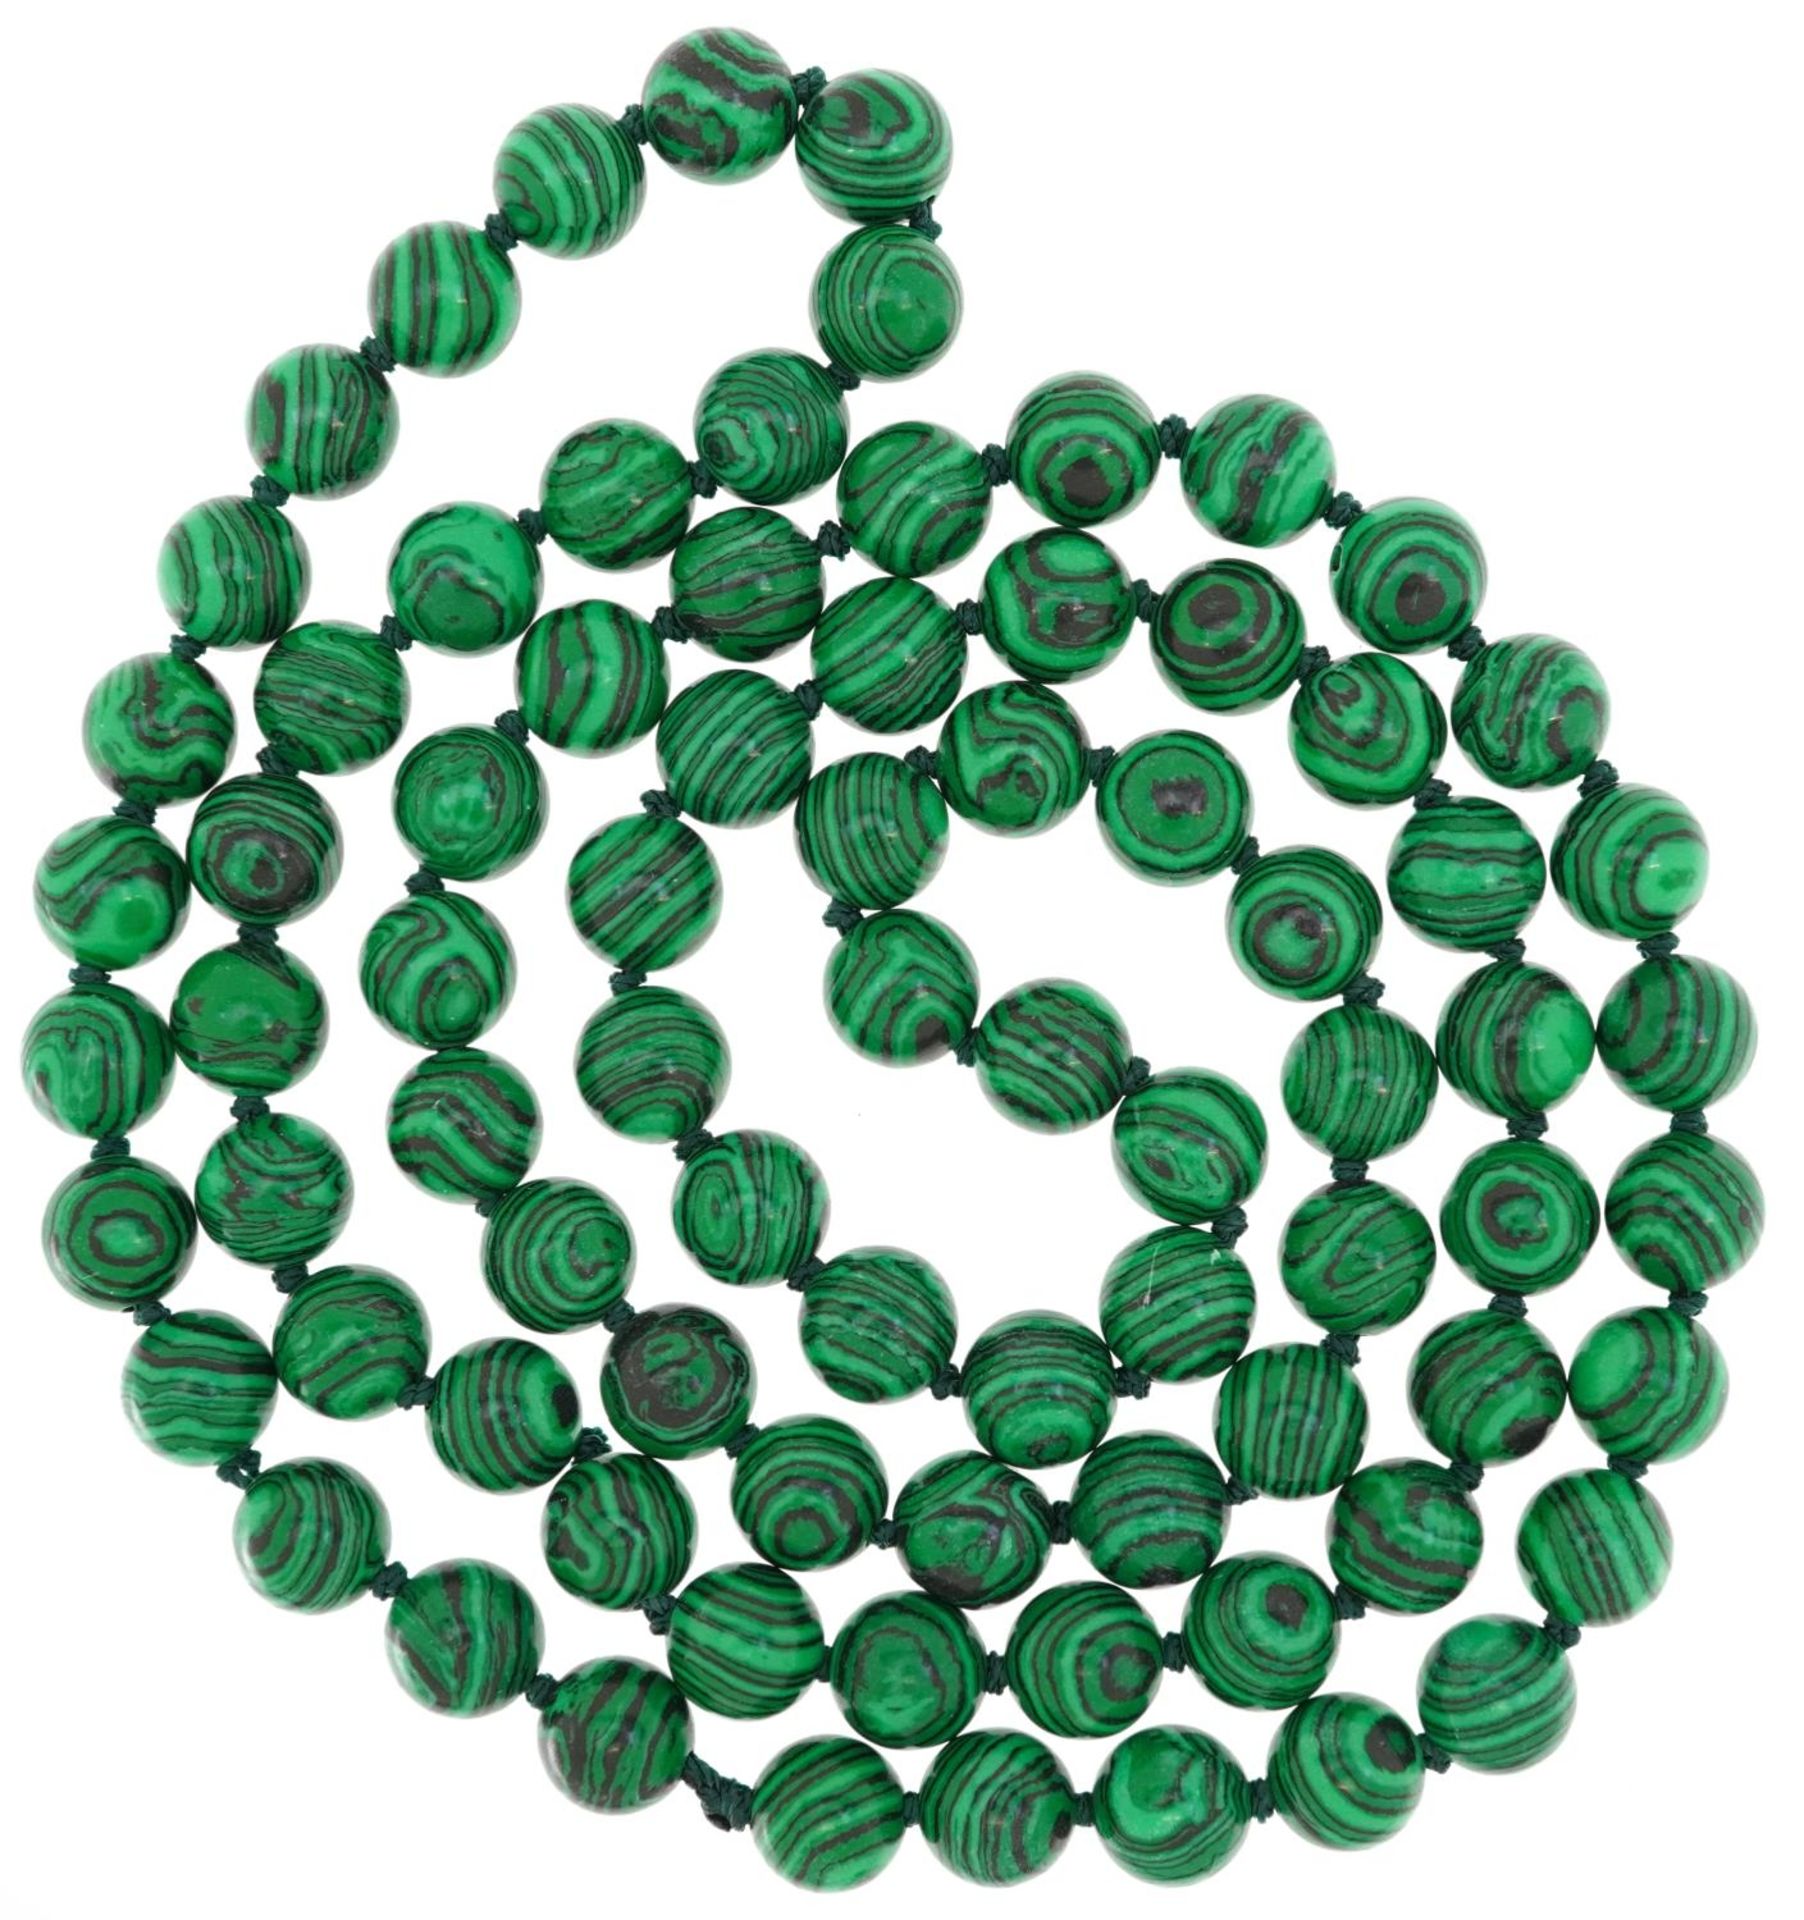 Polished malachite coloured bead necklace, 90cm in length, 94.0g - Image 2 of 2